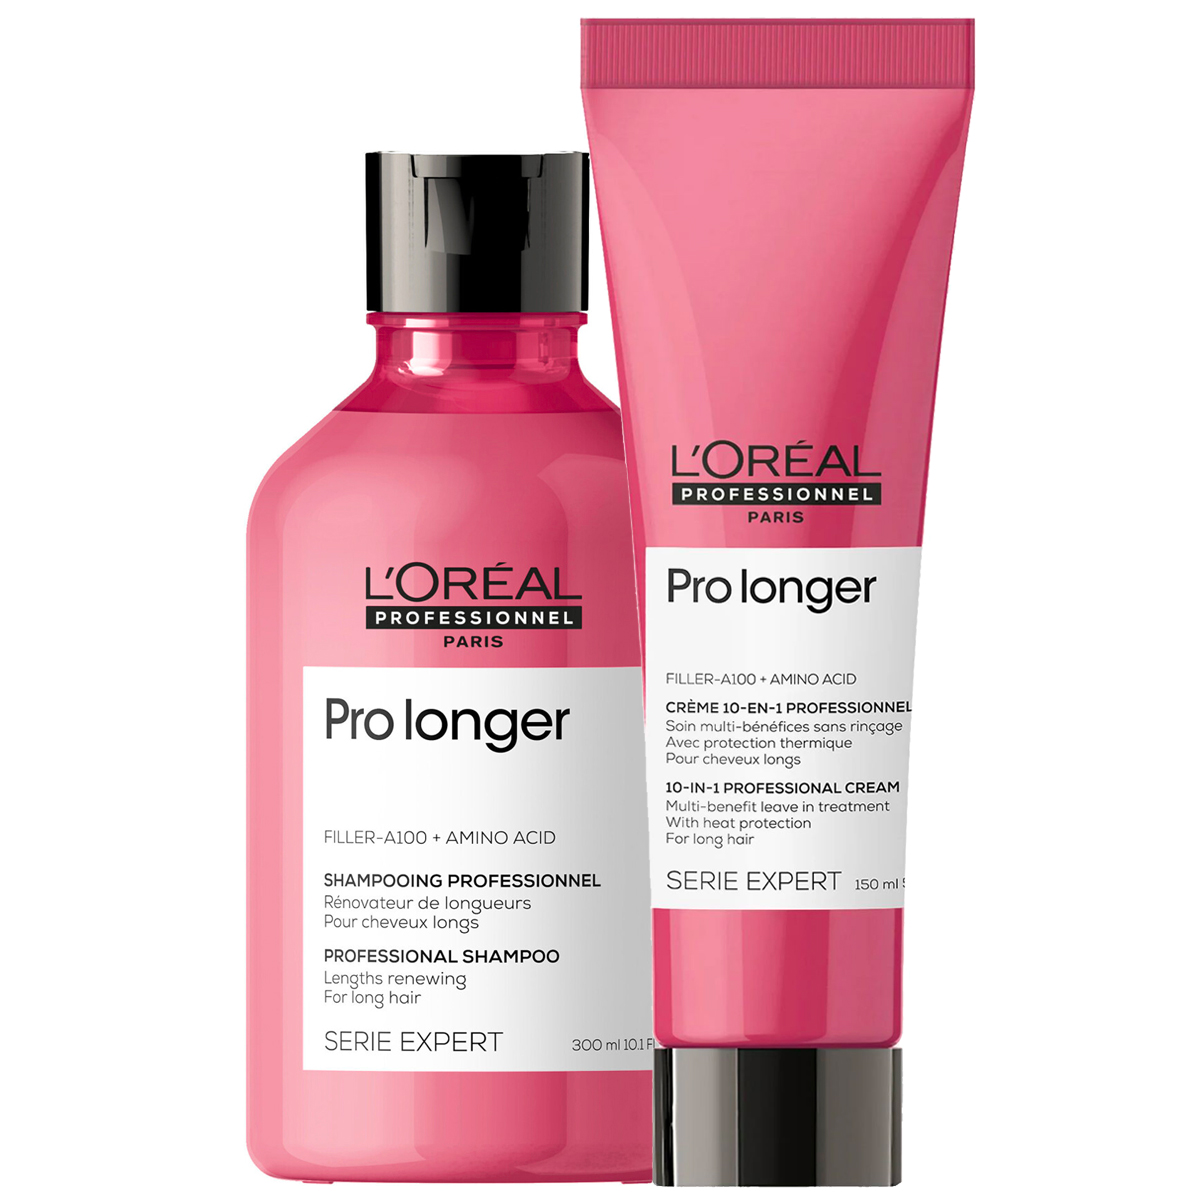 Duo Shampoing & Crme Pro Longer L'Oral Professionnel